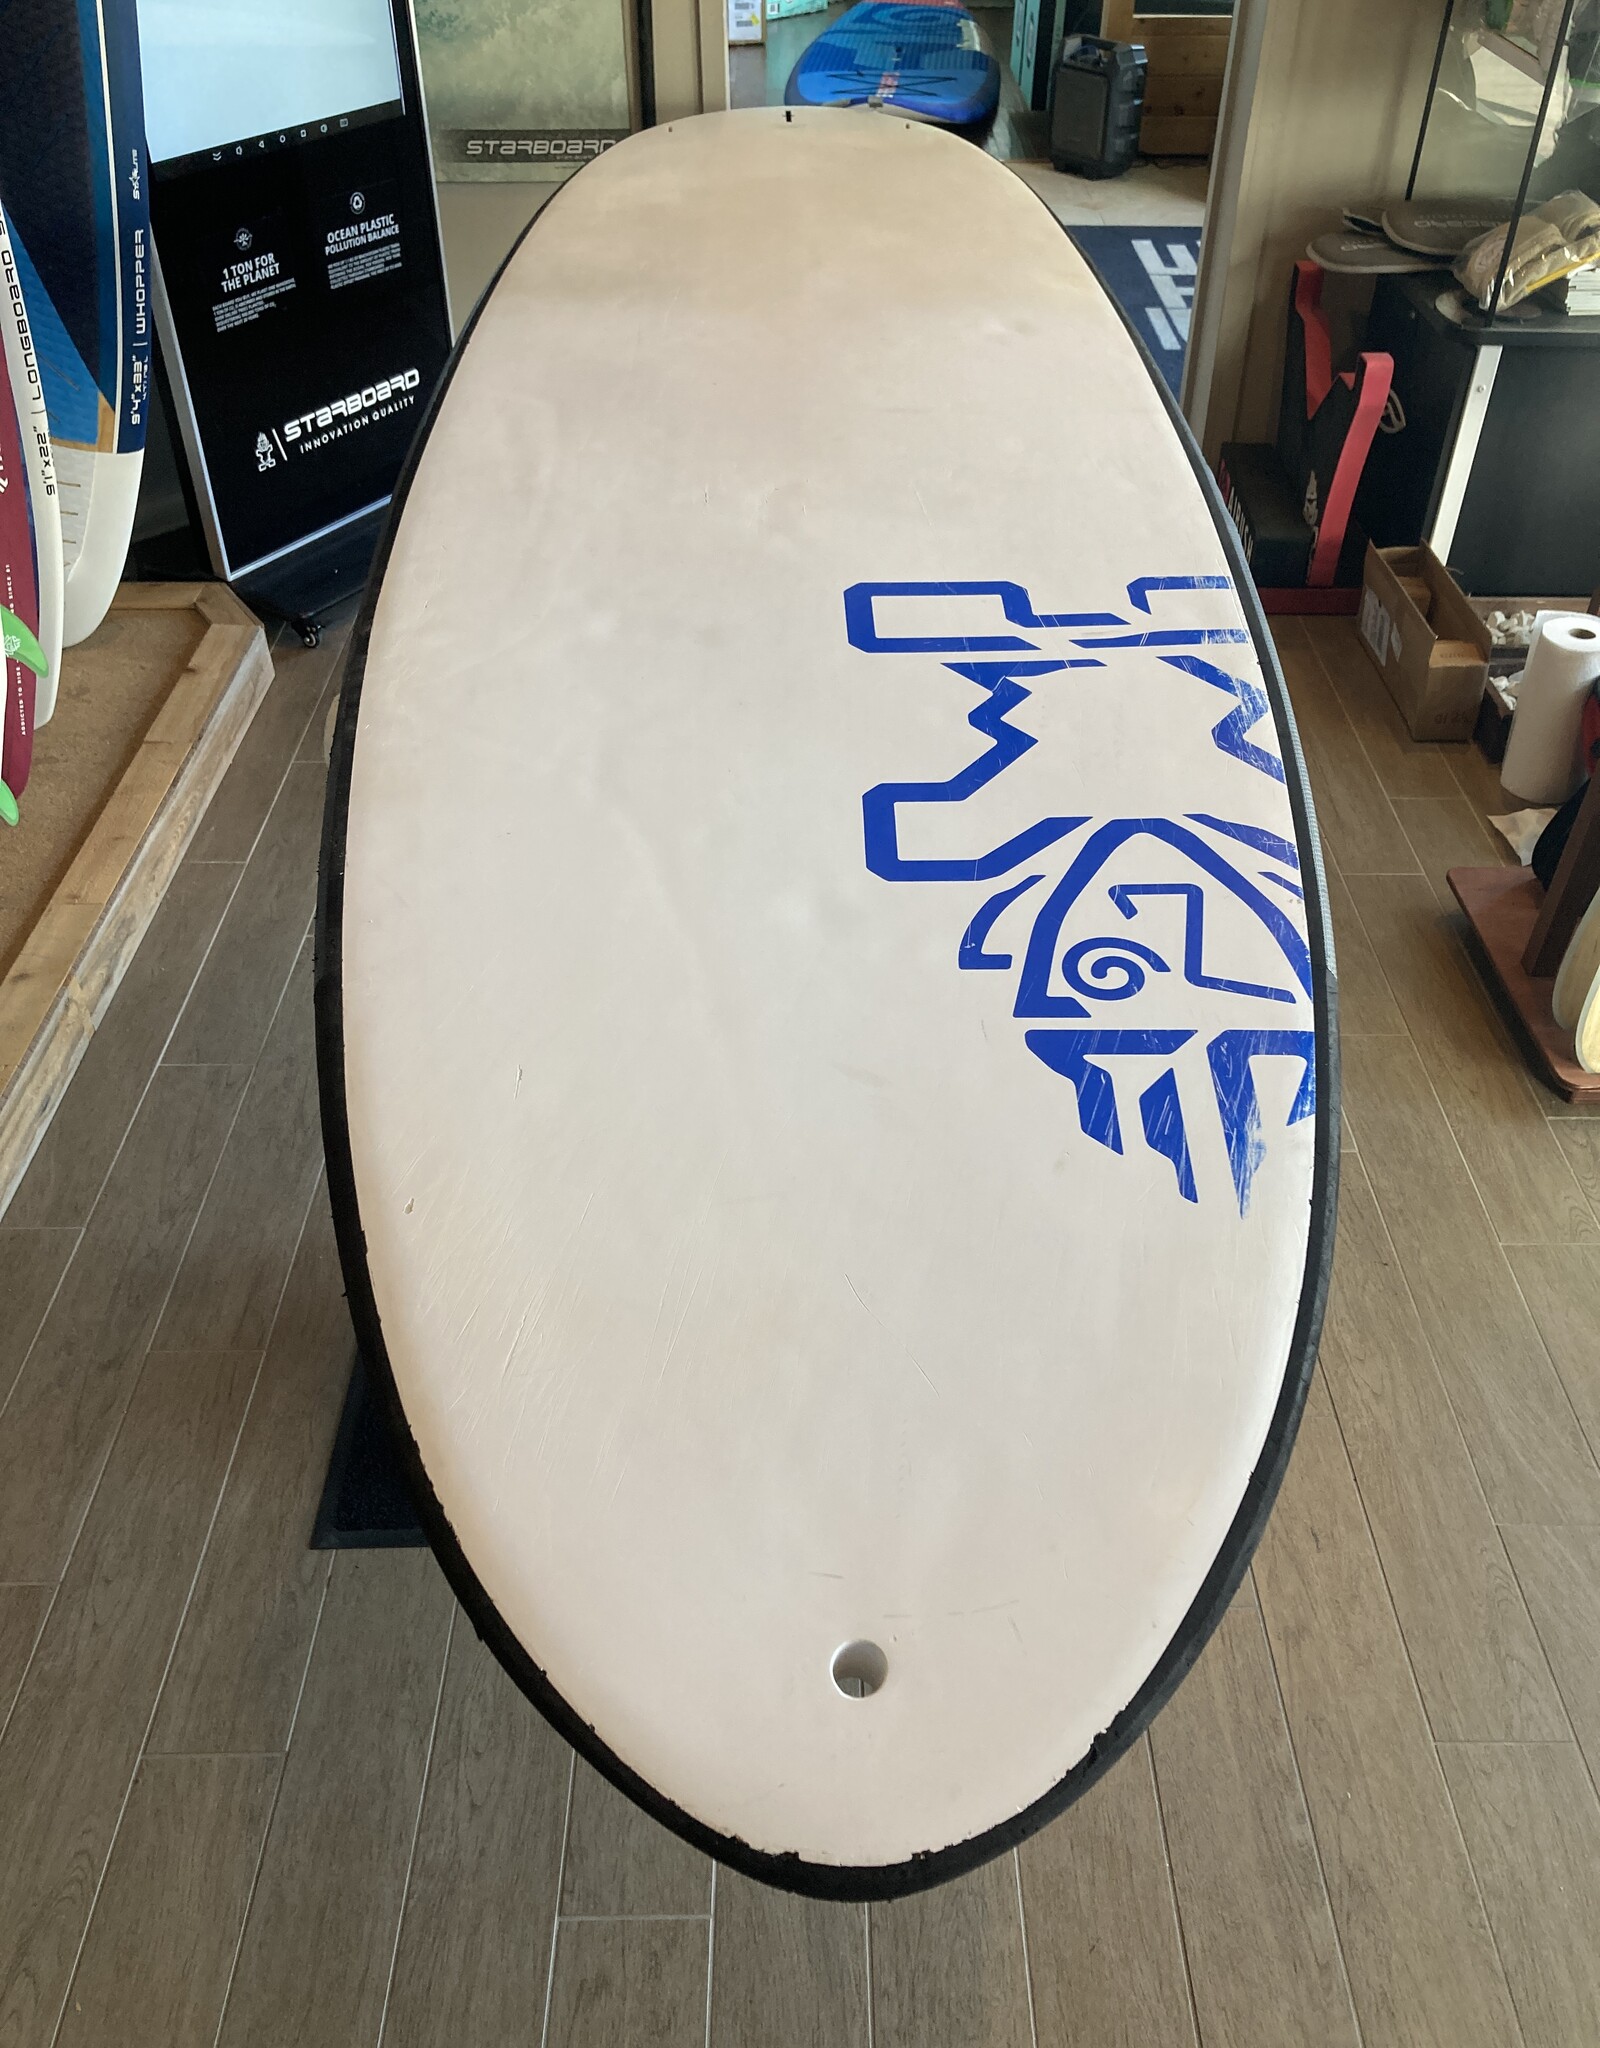 Starboard USED DEMO BOARD - STARBOARD SUP BLEND 11'2x30